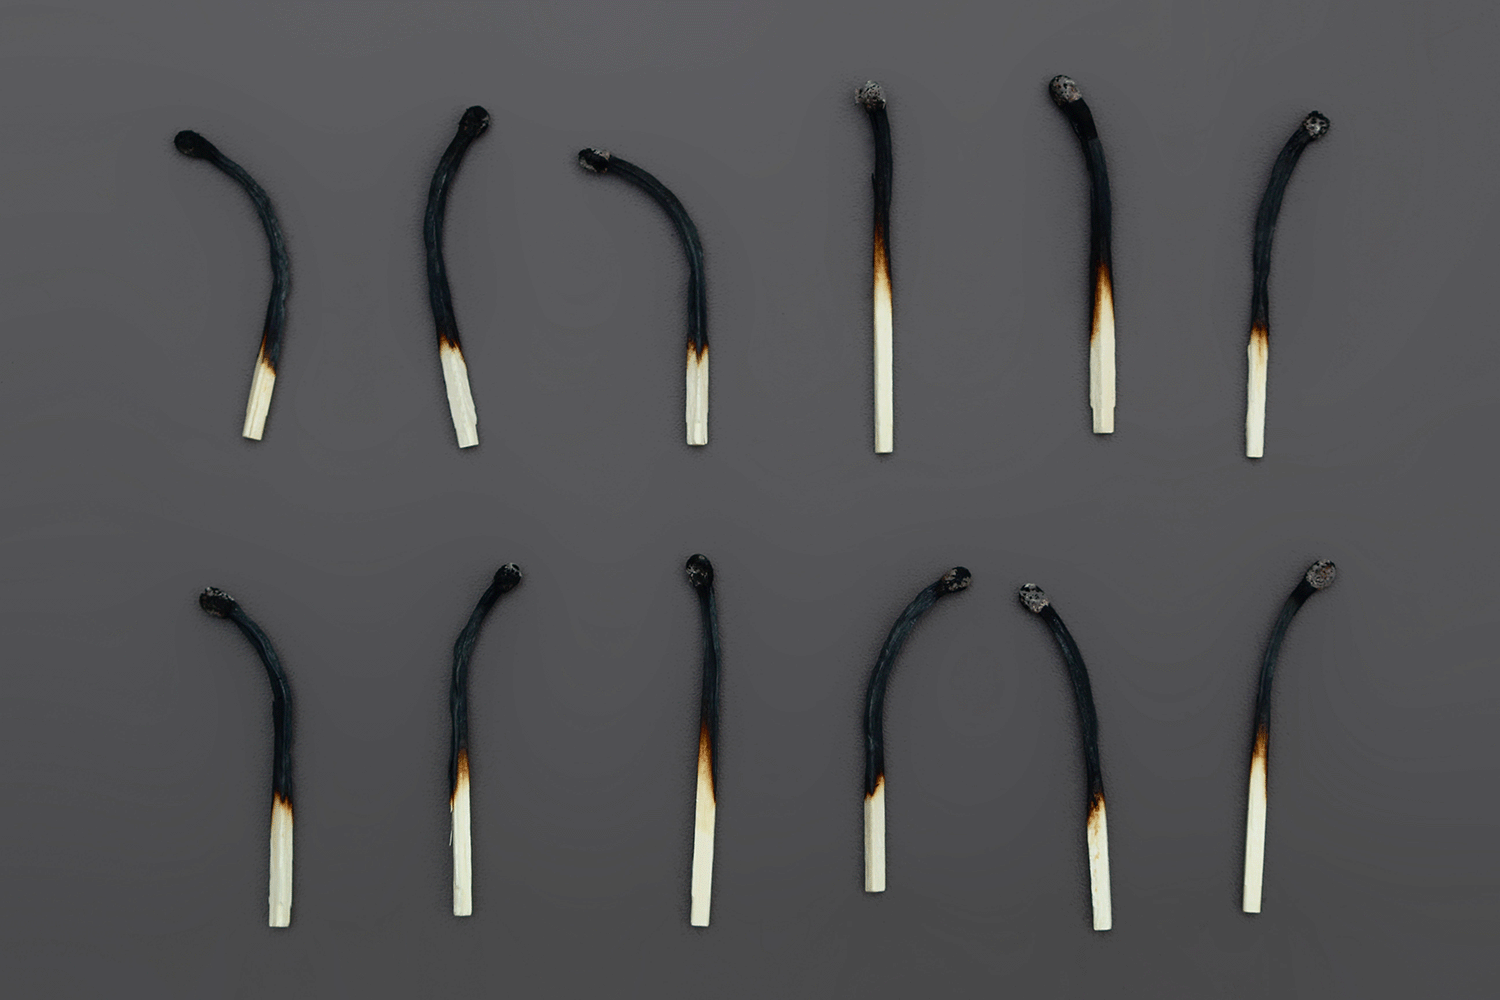 12 matches are half burnt and laid out in two rows on a gray background.